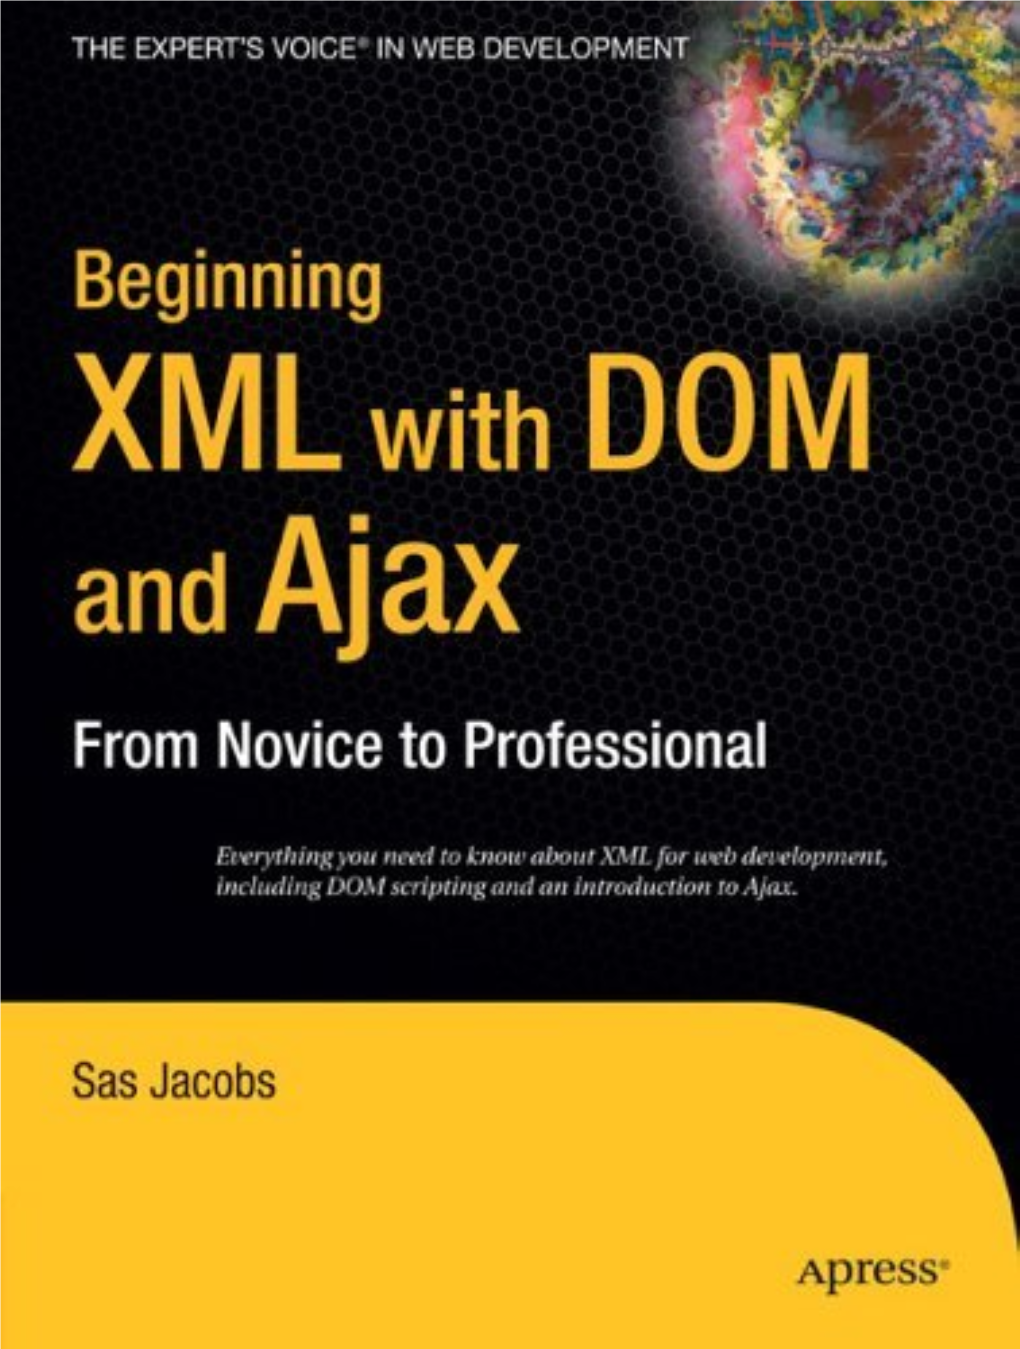 Beginning XML with DOM and Ajax from Novice to Professional